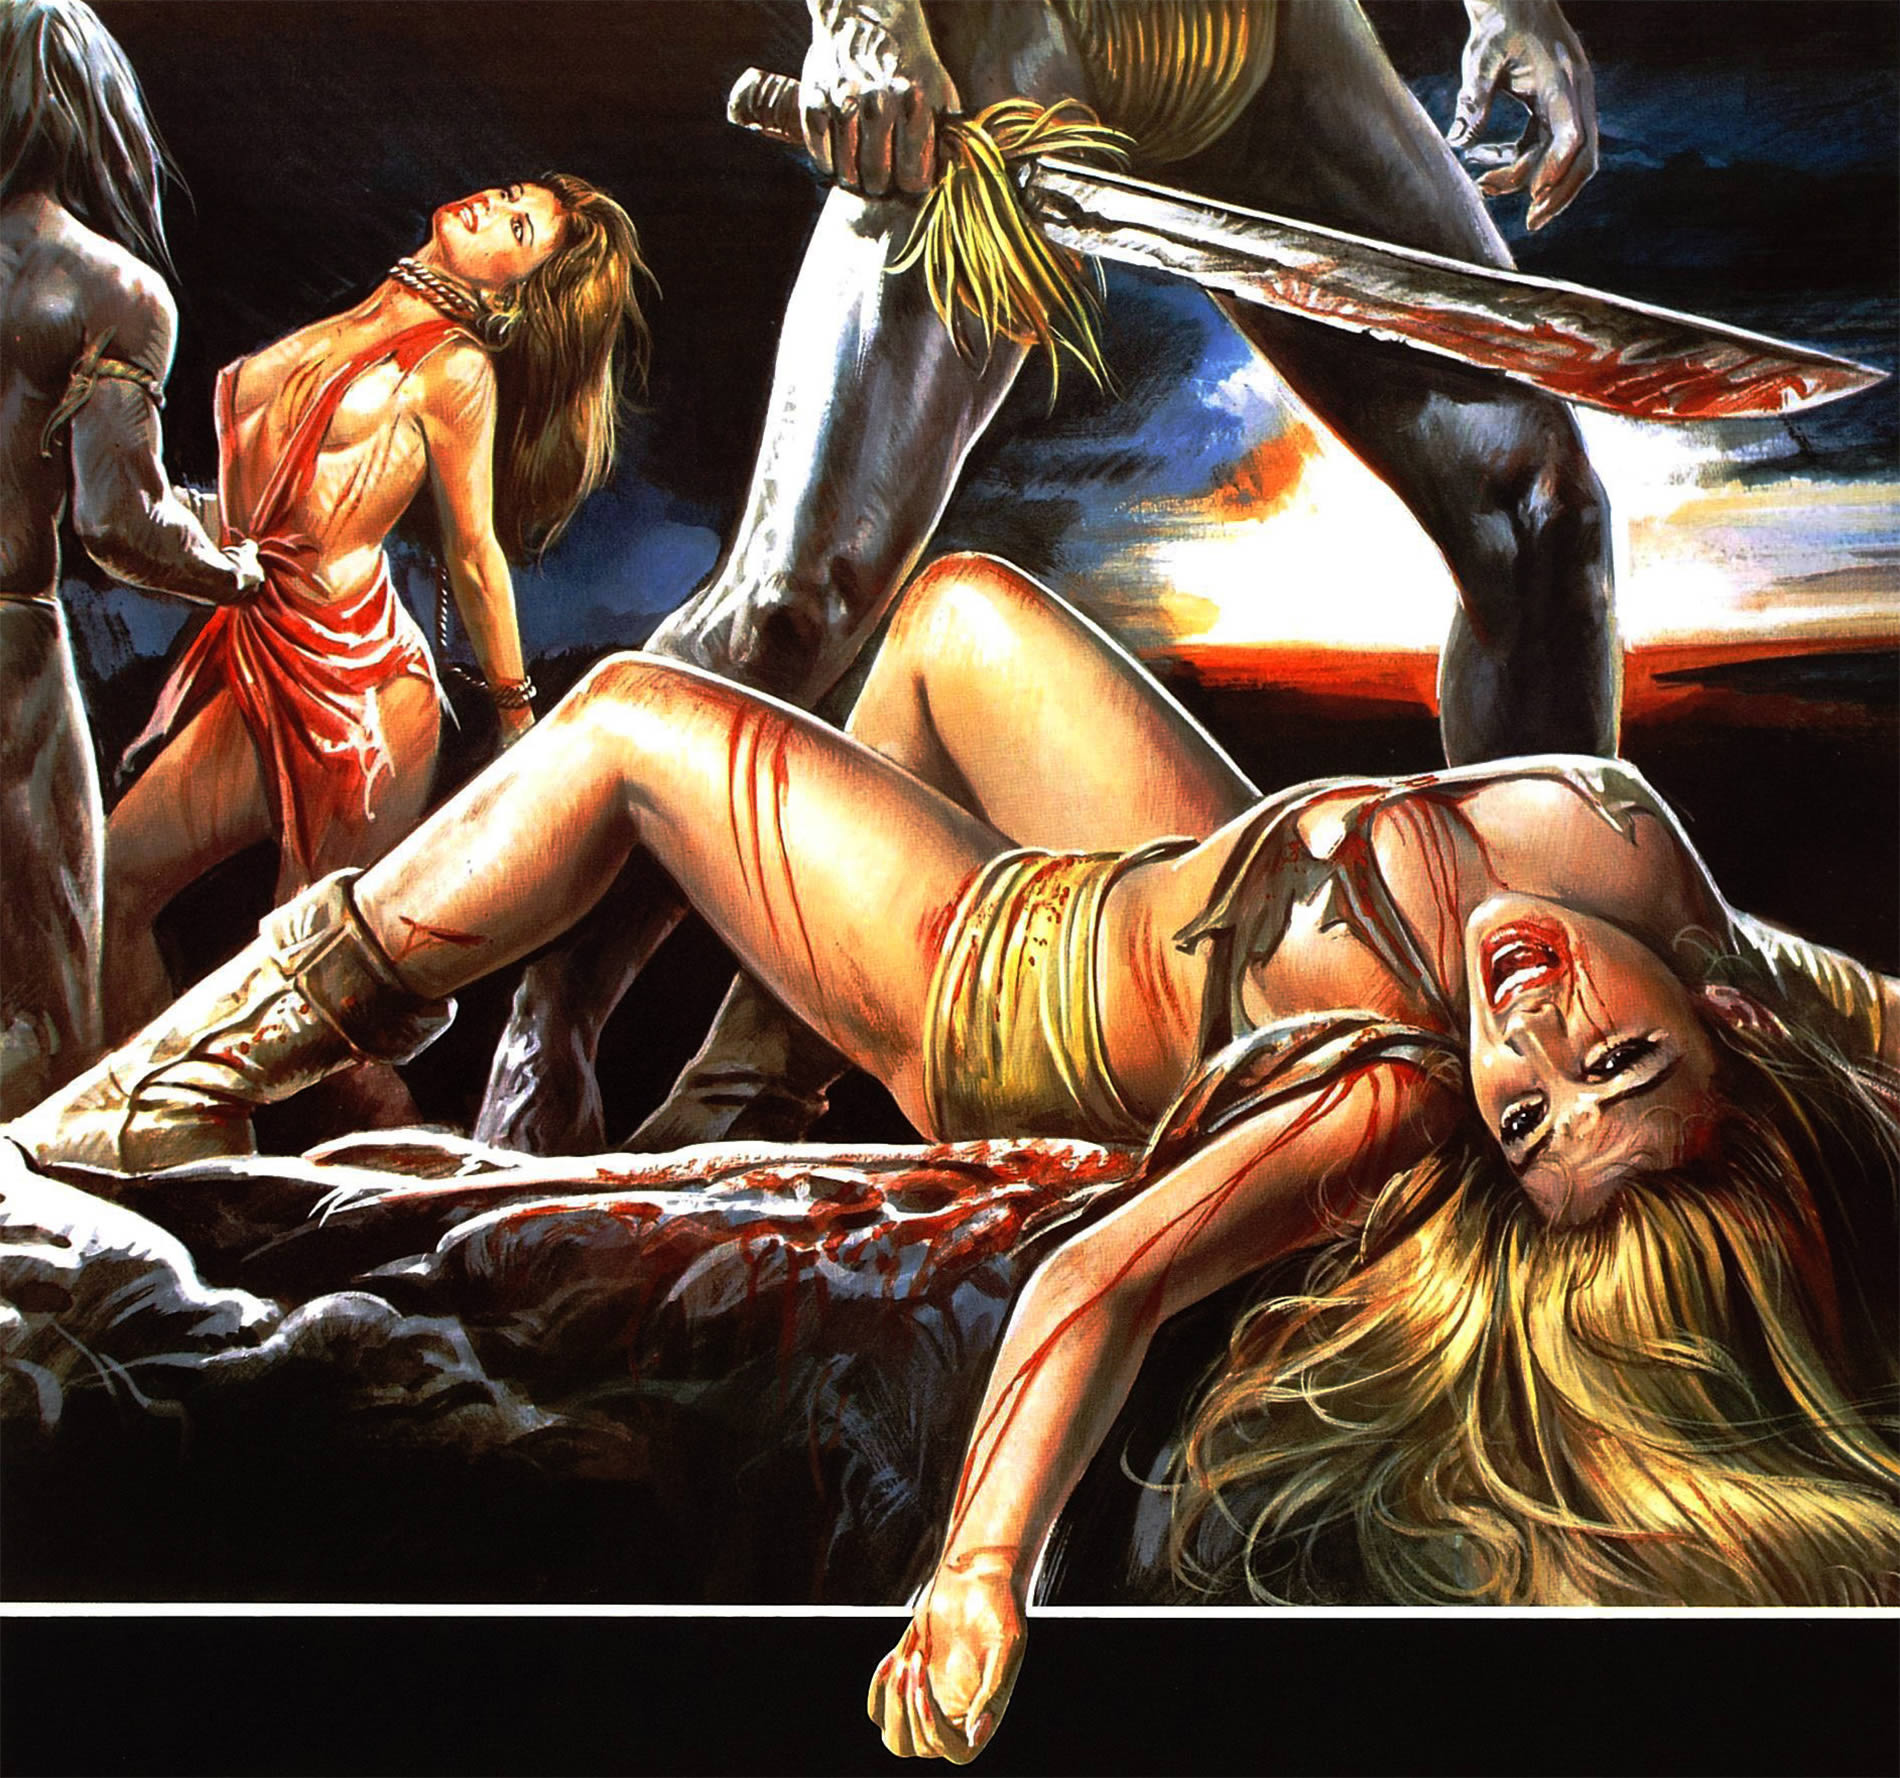 movie poster of cannibal ferox